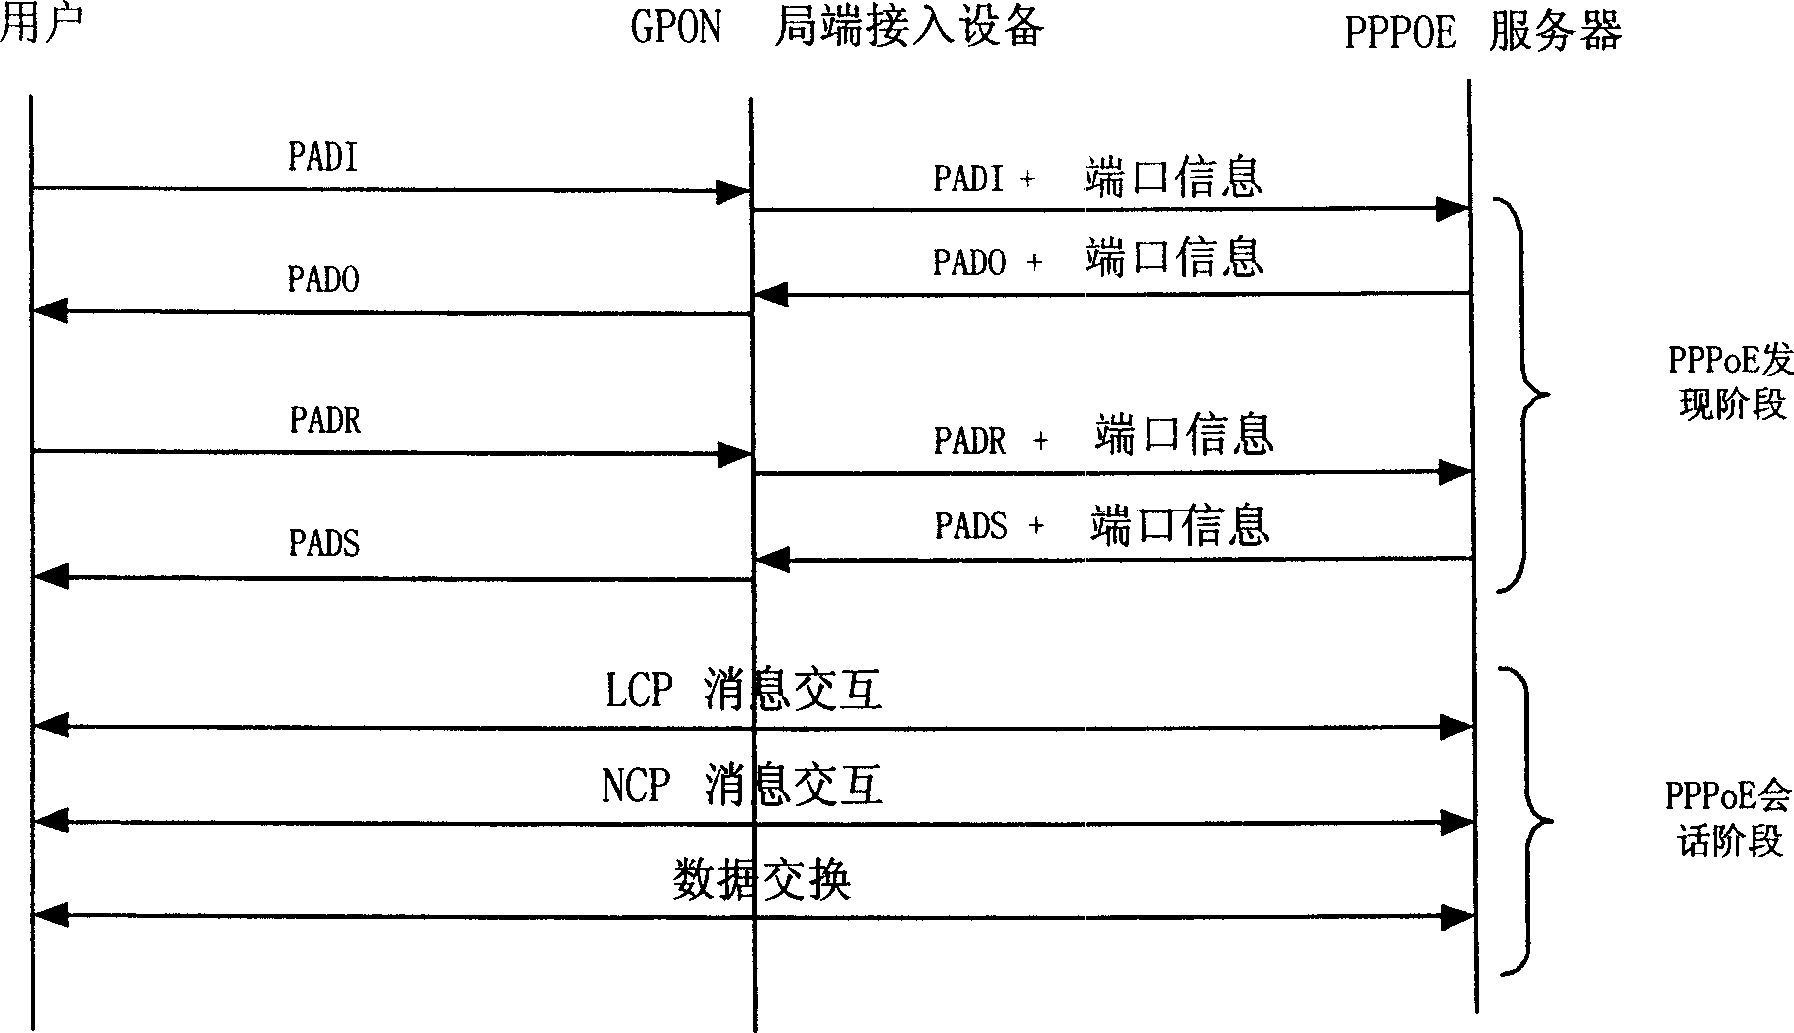 Method for implementing user port orientation on GPON access equipment